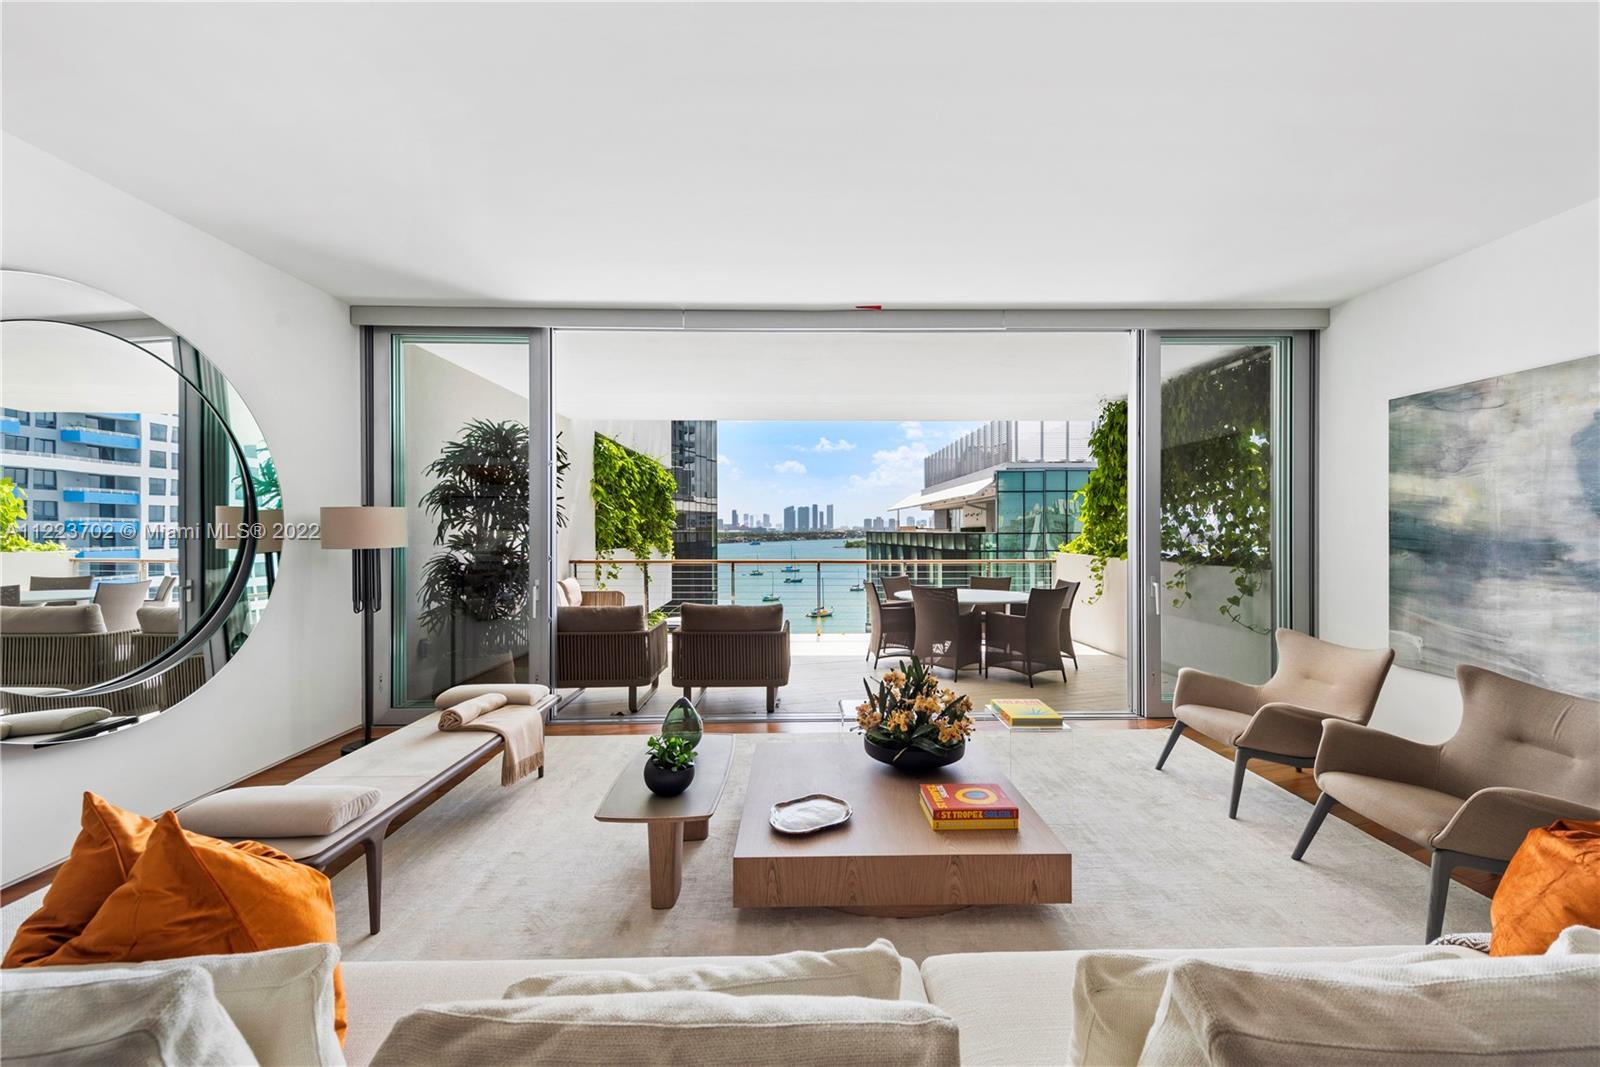 Brand new residence at Monad Terrace offering stunning skyline, Biscayne Bay and Ocean views. This e